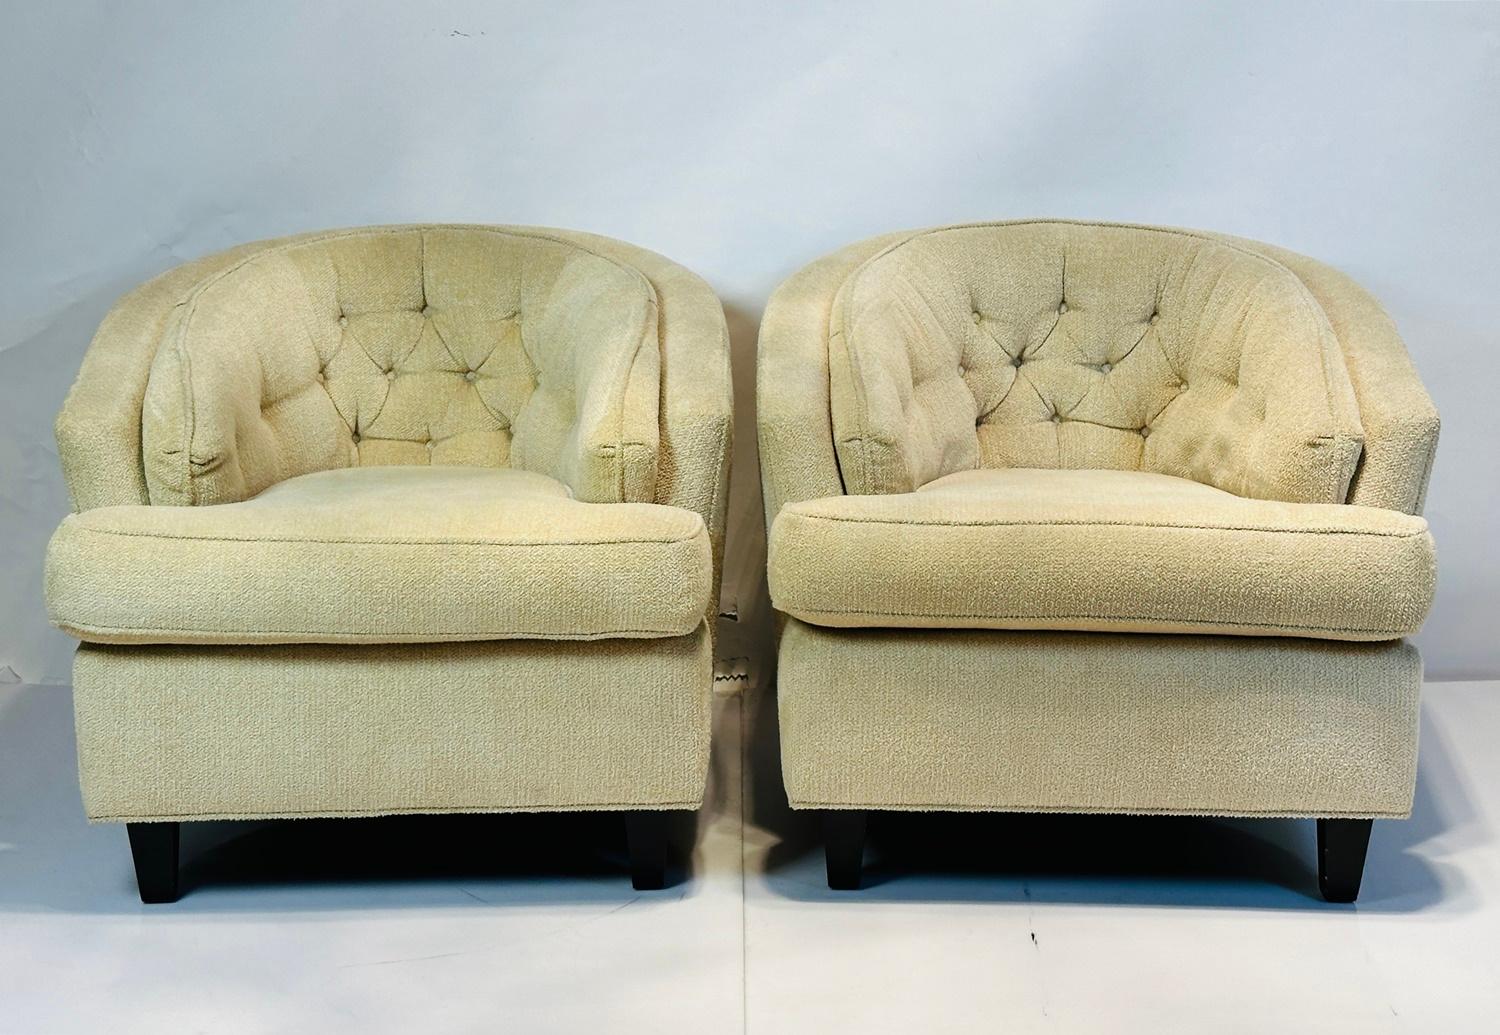 Introducing our Vintage Low Profile Barrel Chairs, the epitome of elegance and sophistication. This exquisite duo is a perfect addition to any refined interior. 

The first chair, adorned with a plush tufted back, exudes an air of regality. Its